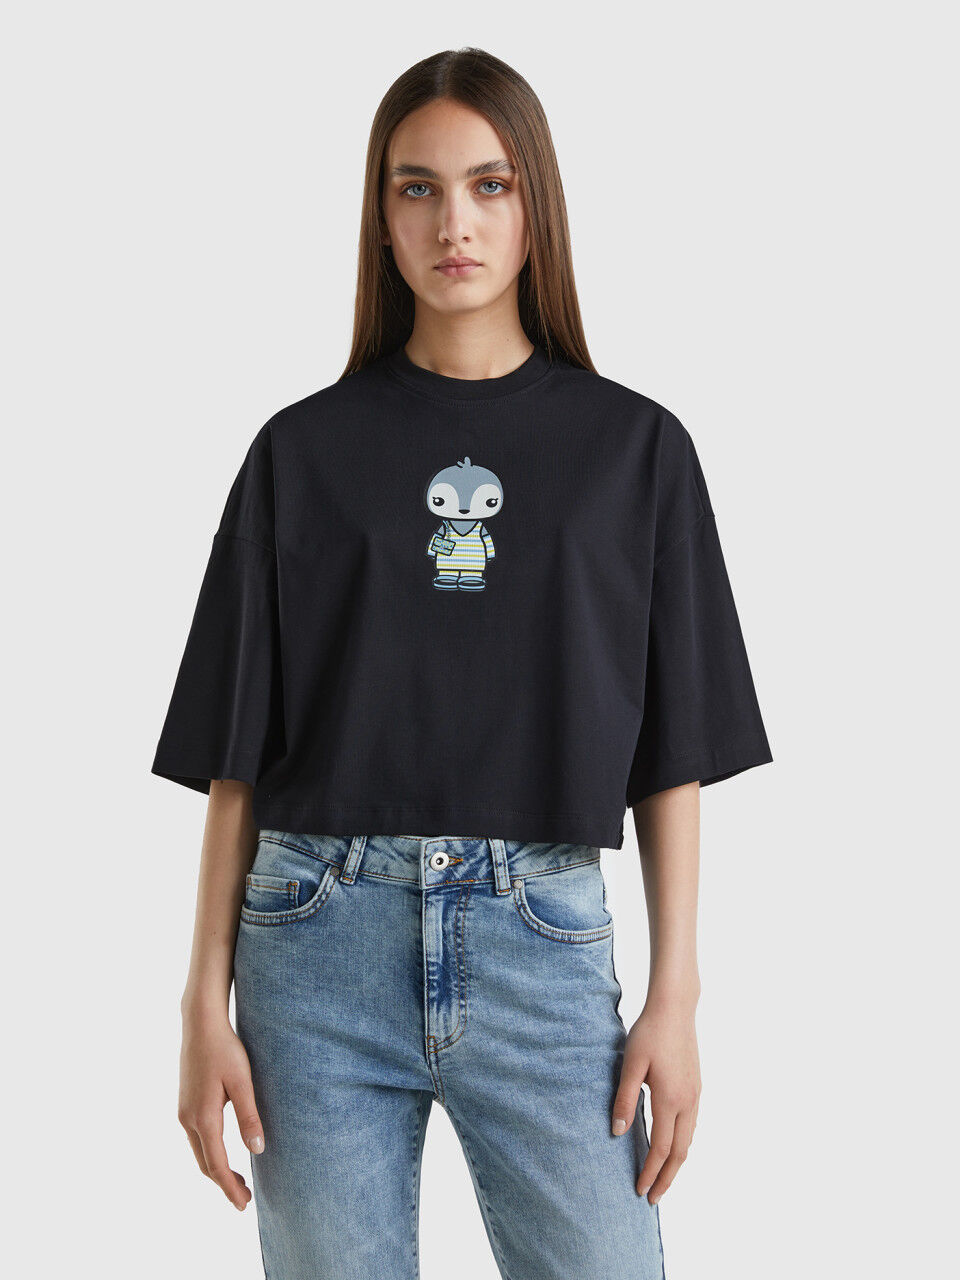 Black cropped Be Family t-shirt